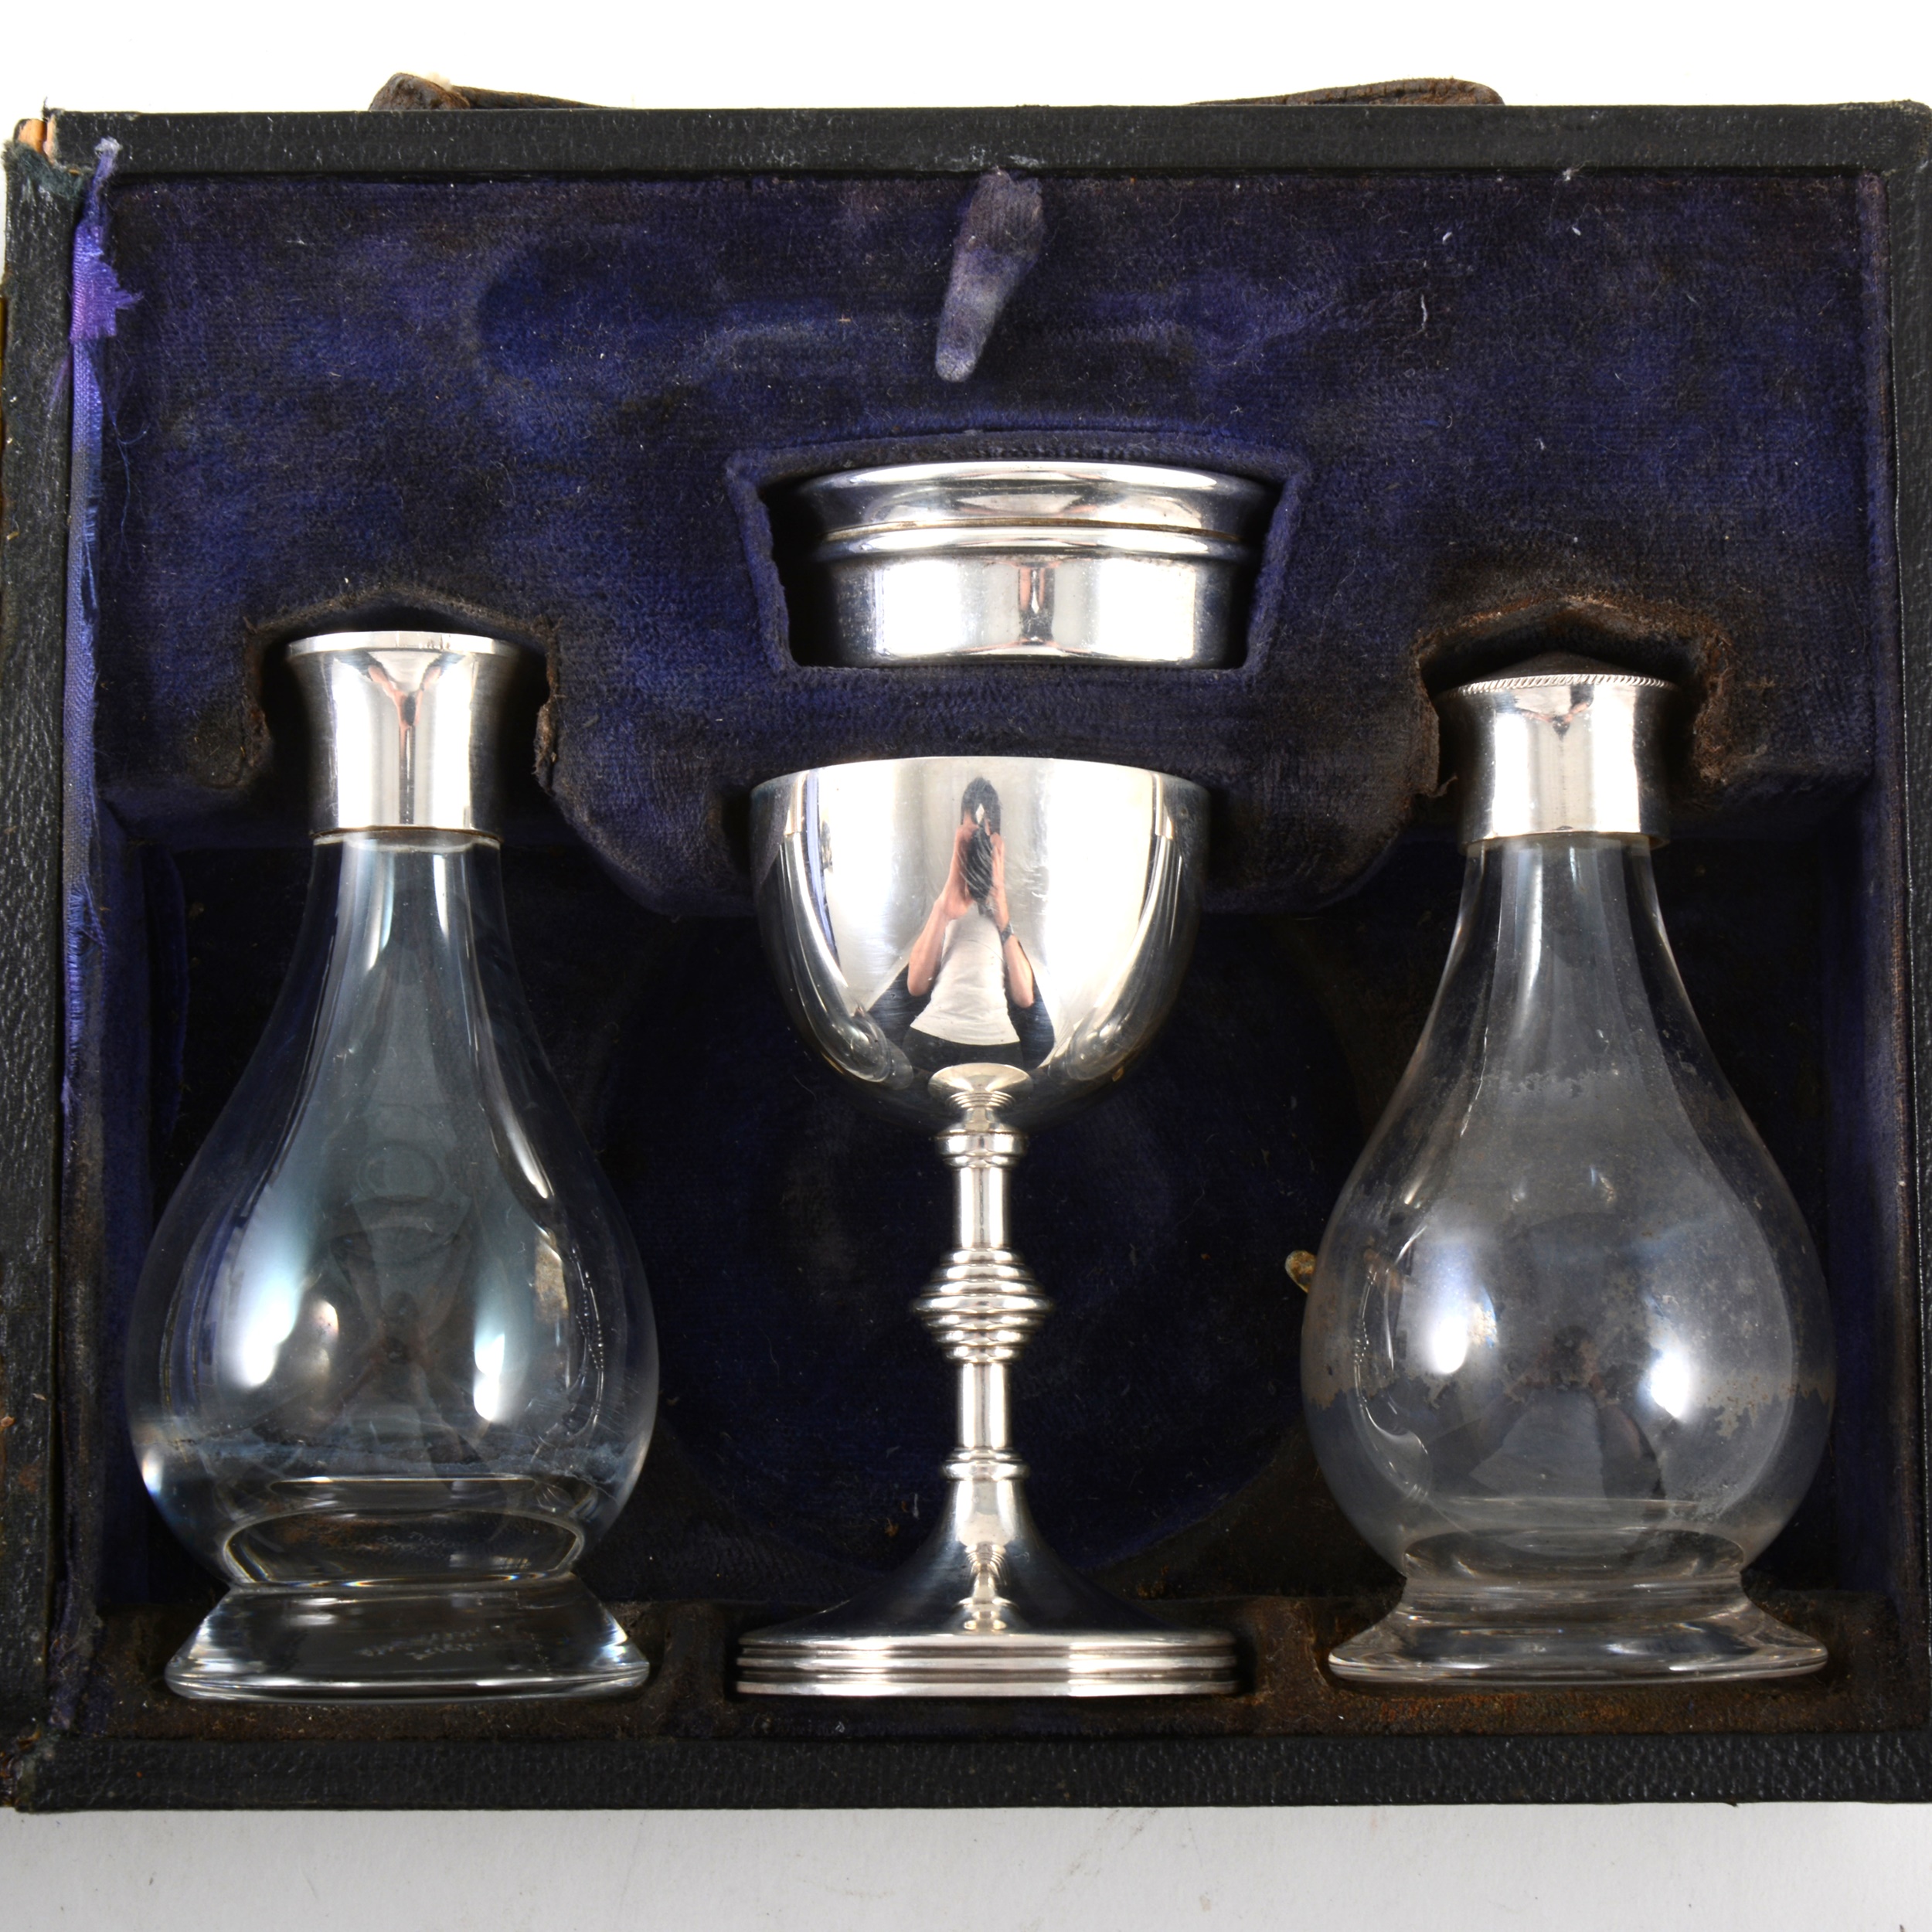 Two travelling communion sets, one silver, the other plated, and another paten and chalice. - Image 3 of 5